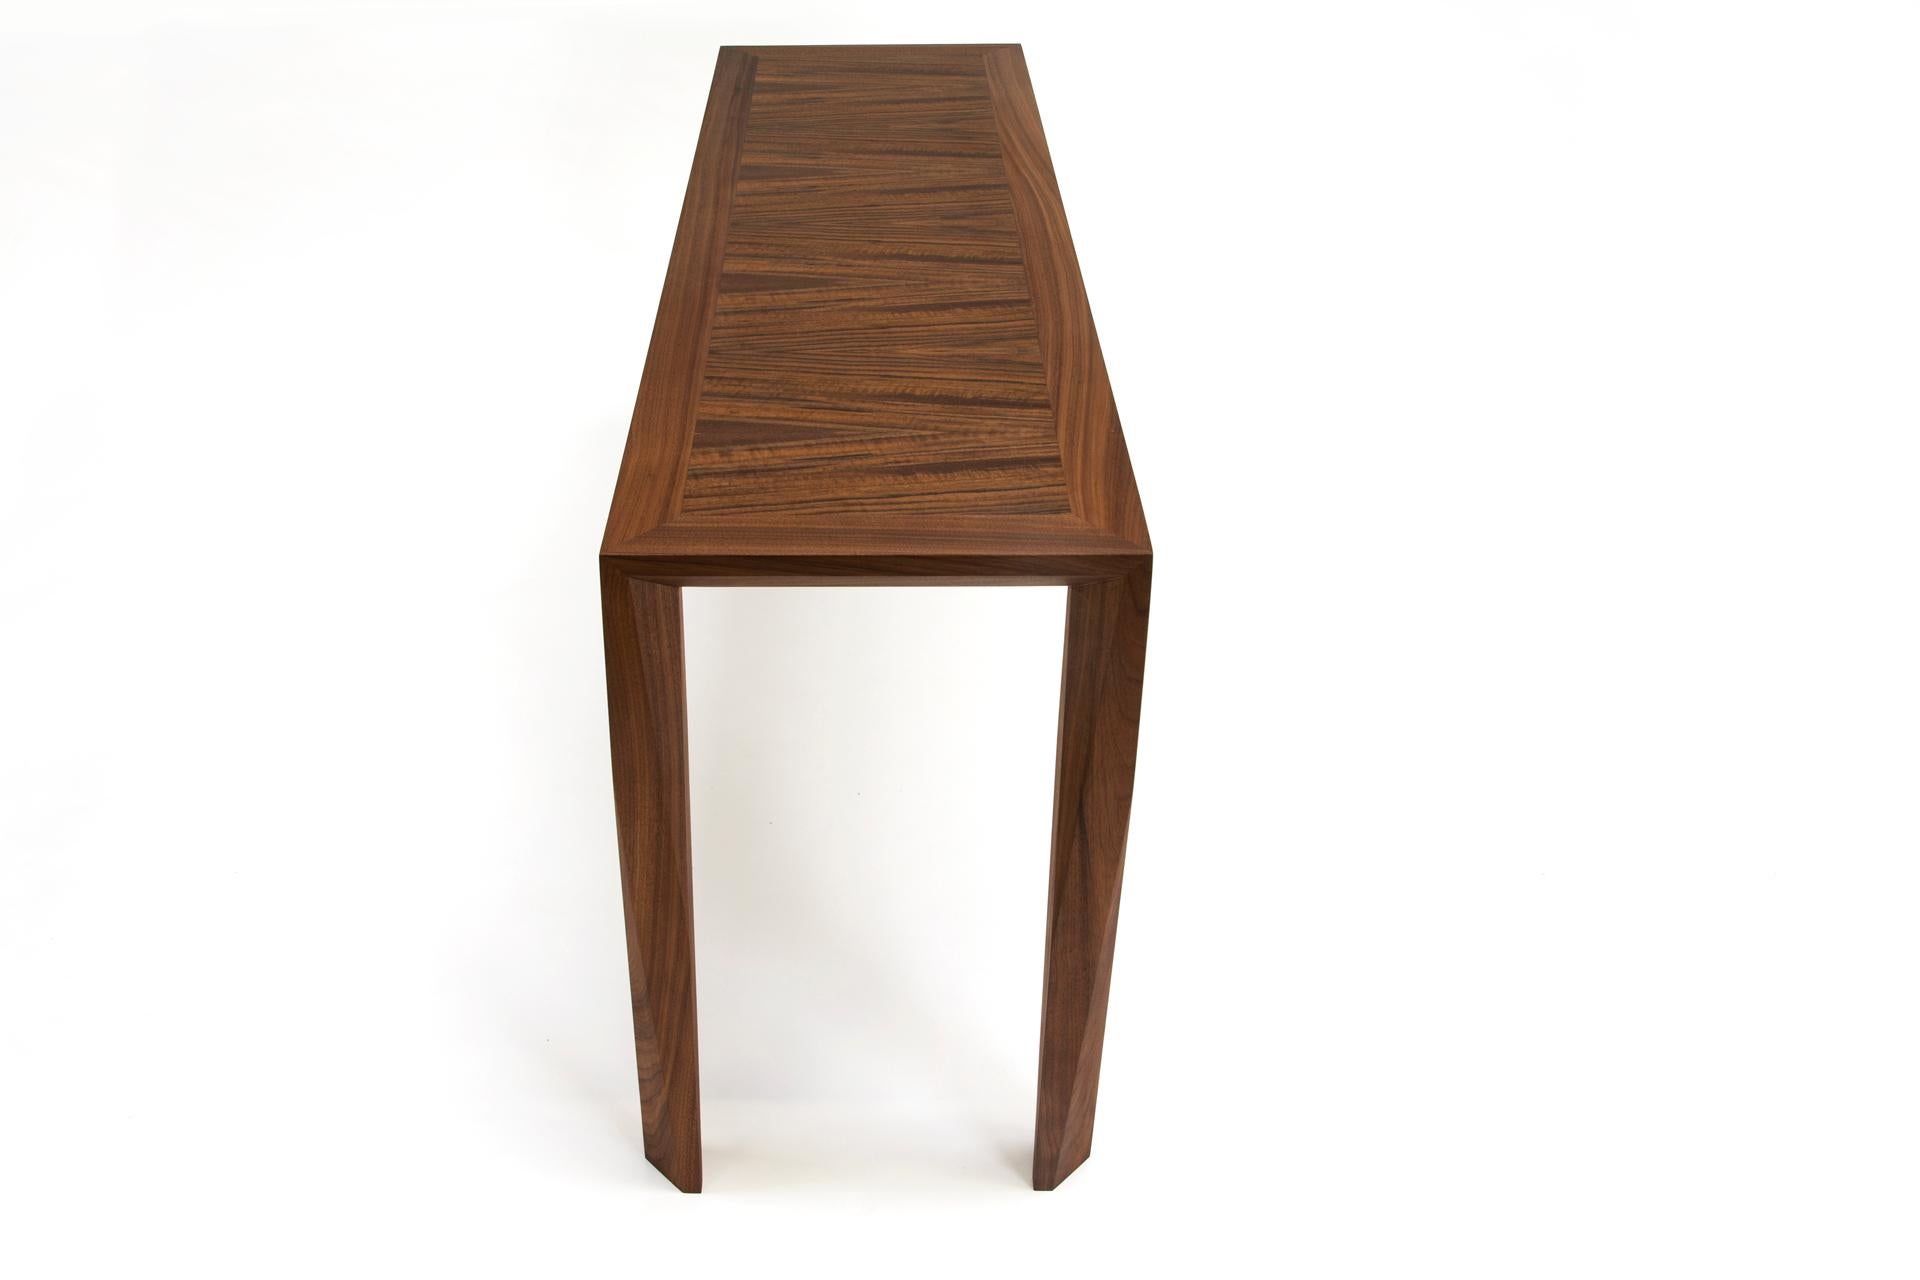 American Modern Wood Console Table, in Walnut, by Studio DiPaolo For Sale